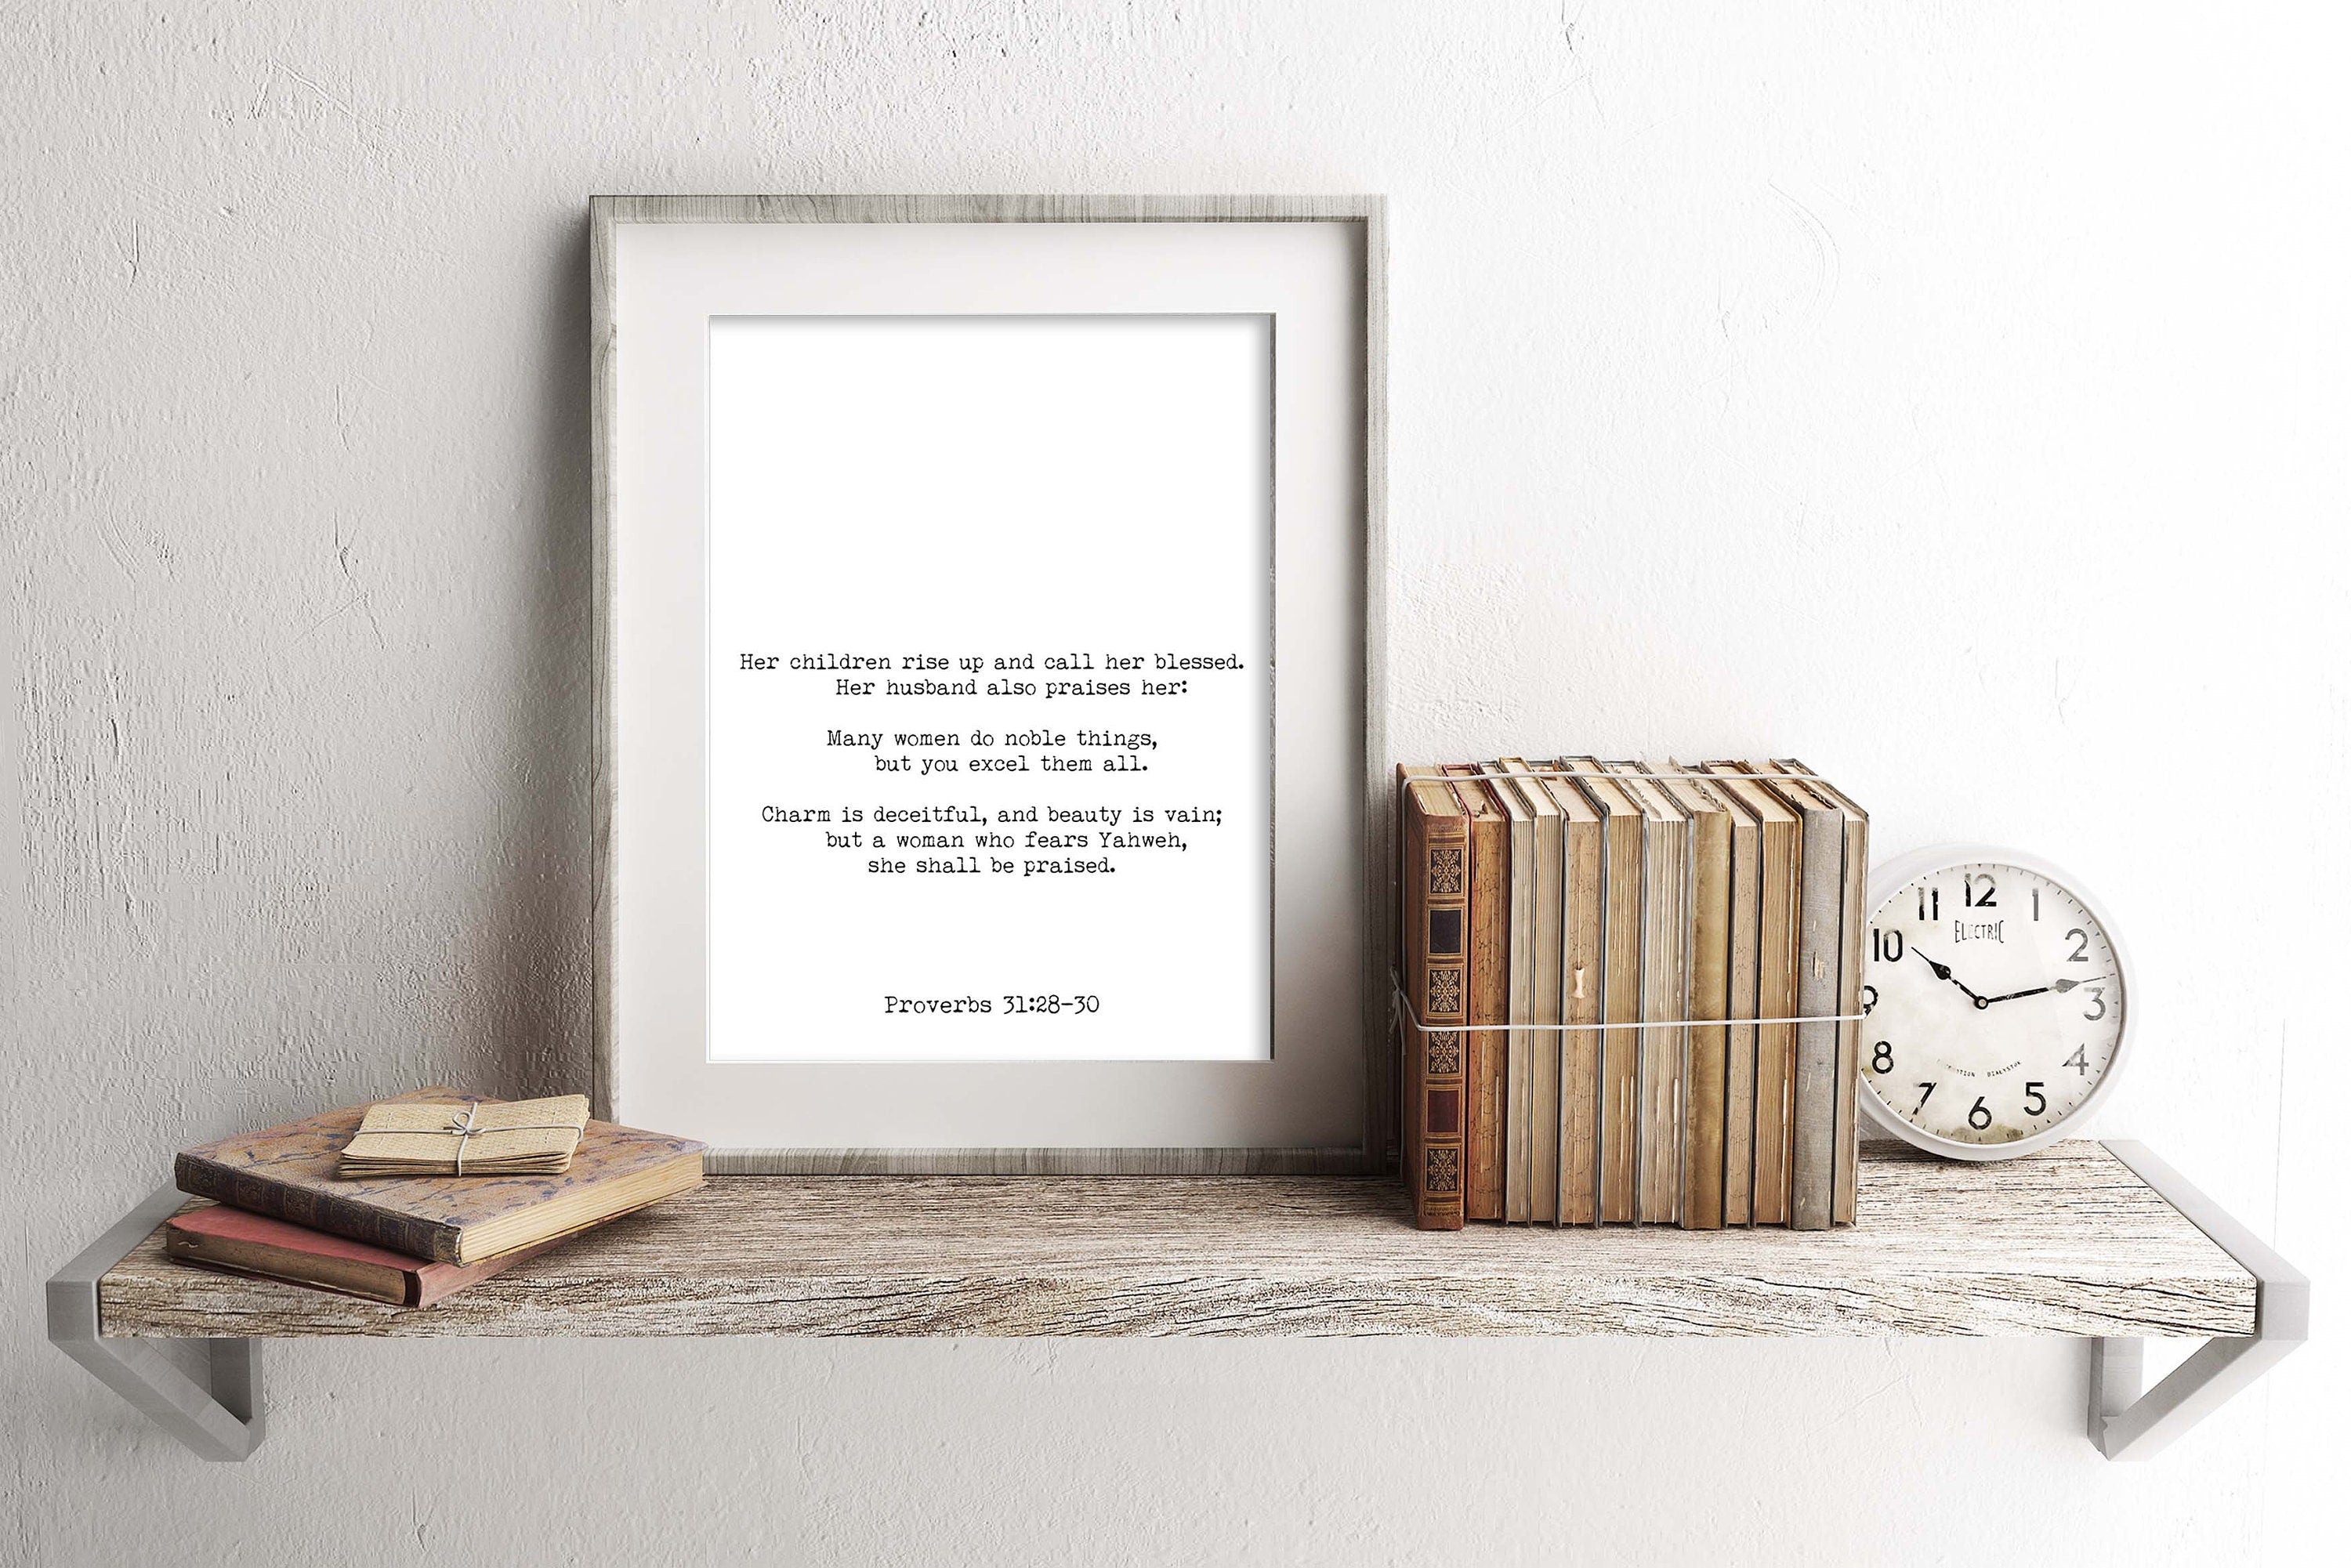 Proverbs 31:28-30 Bible Verse Print, Inspirational Gift Wall Art in Black & White